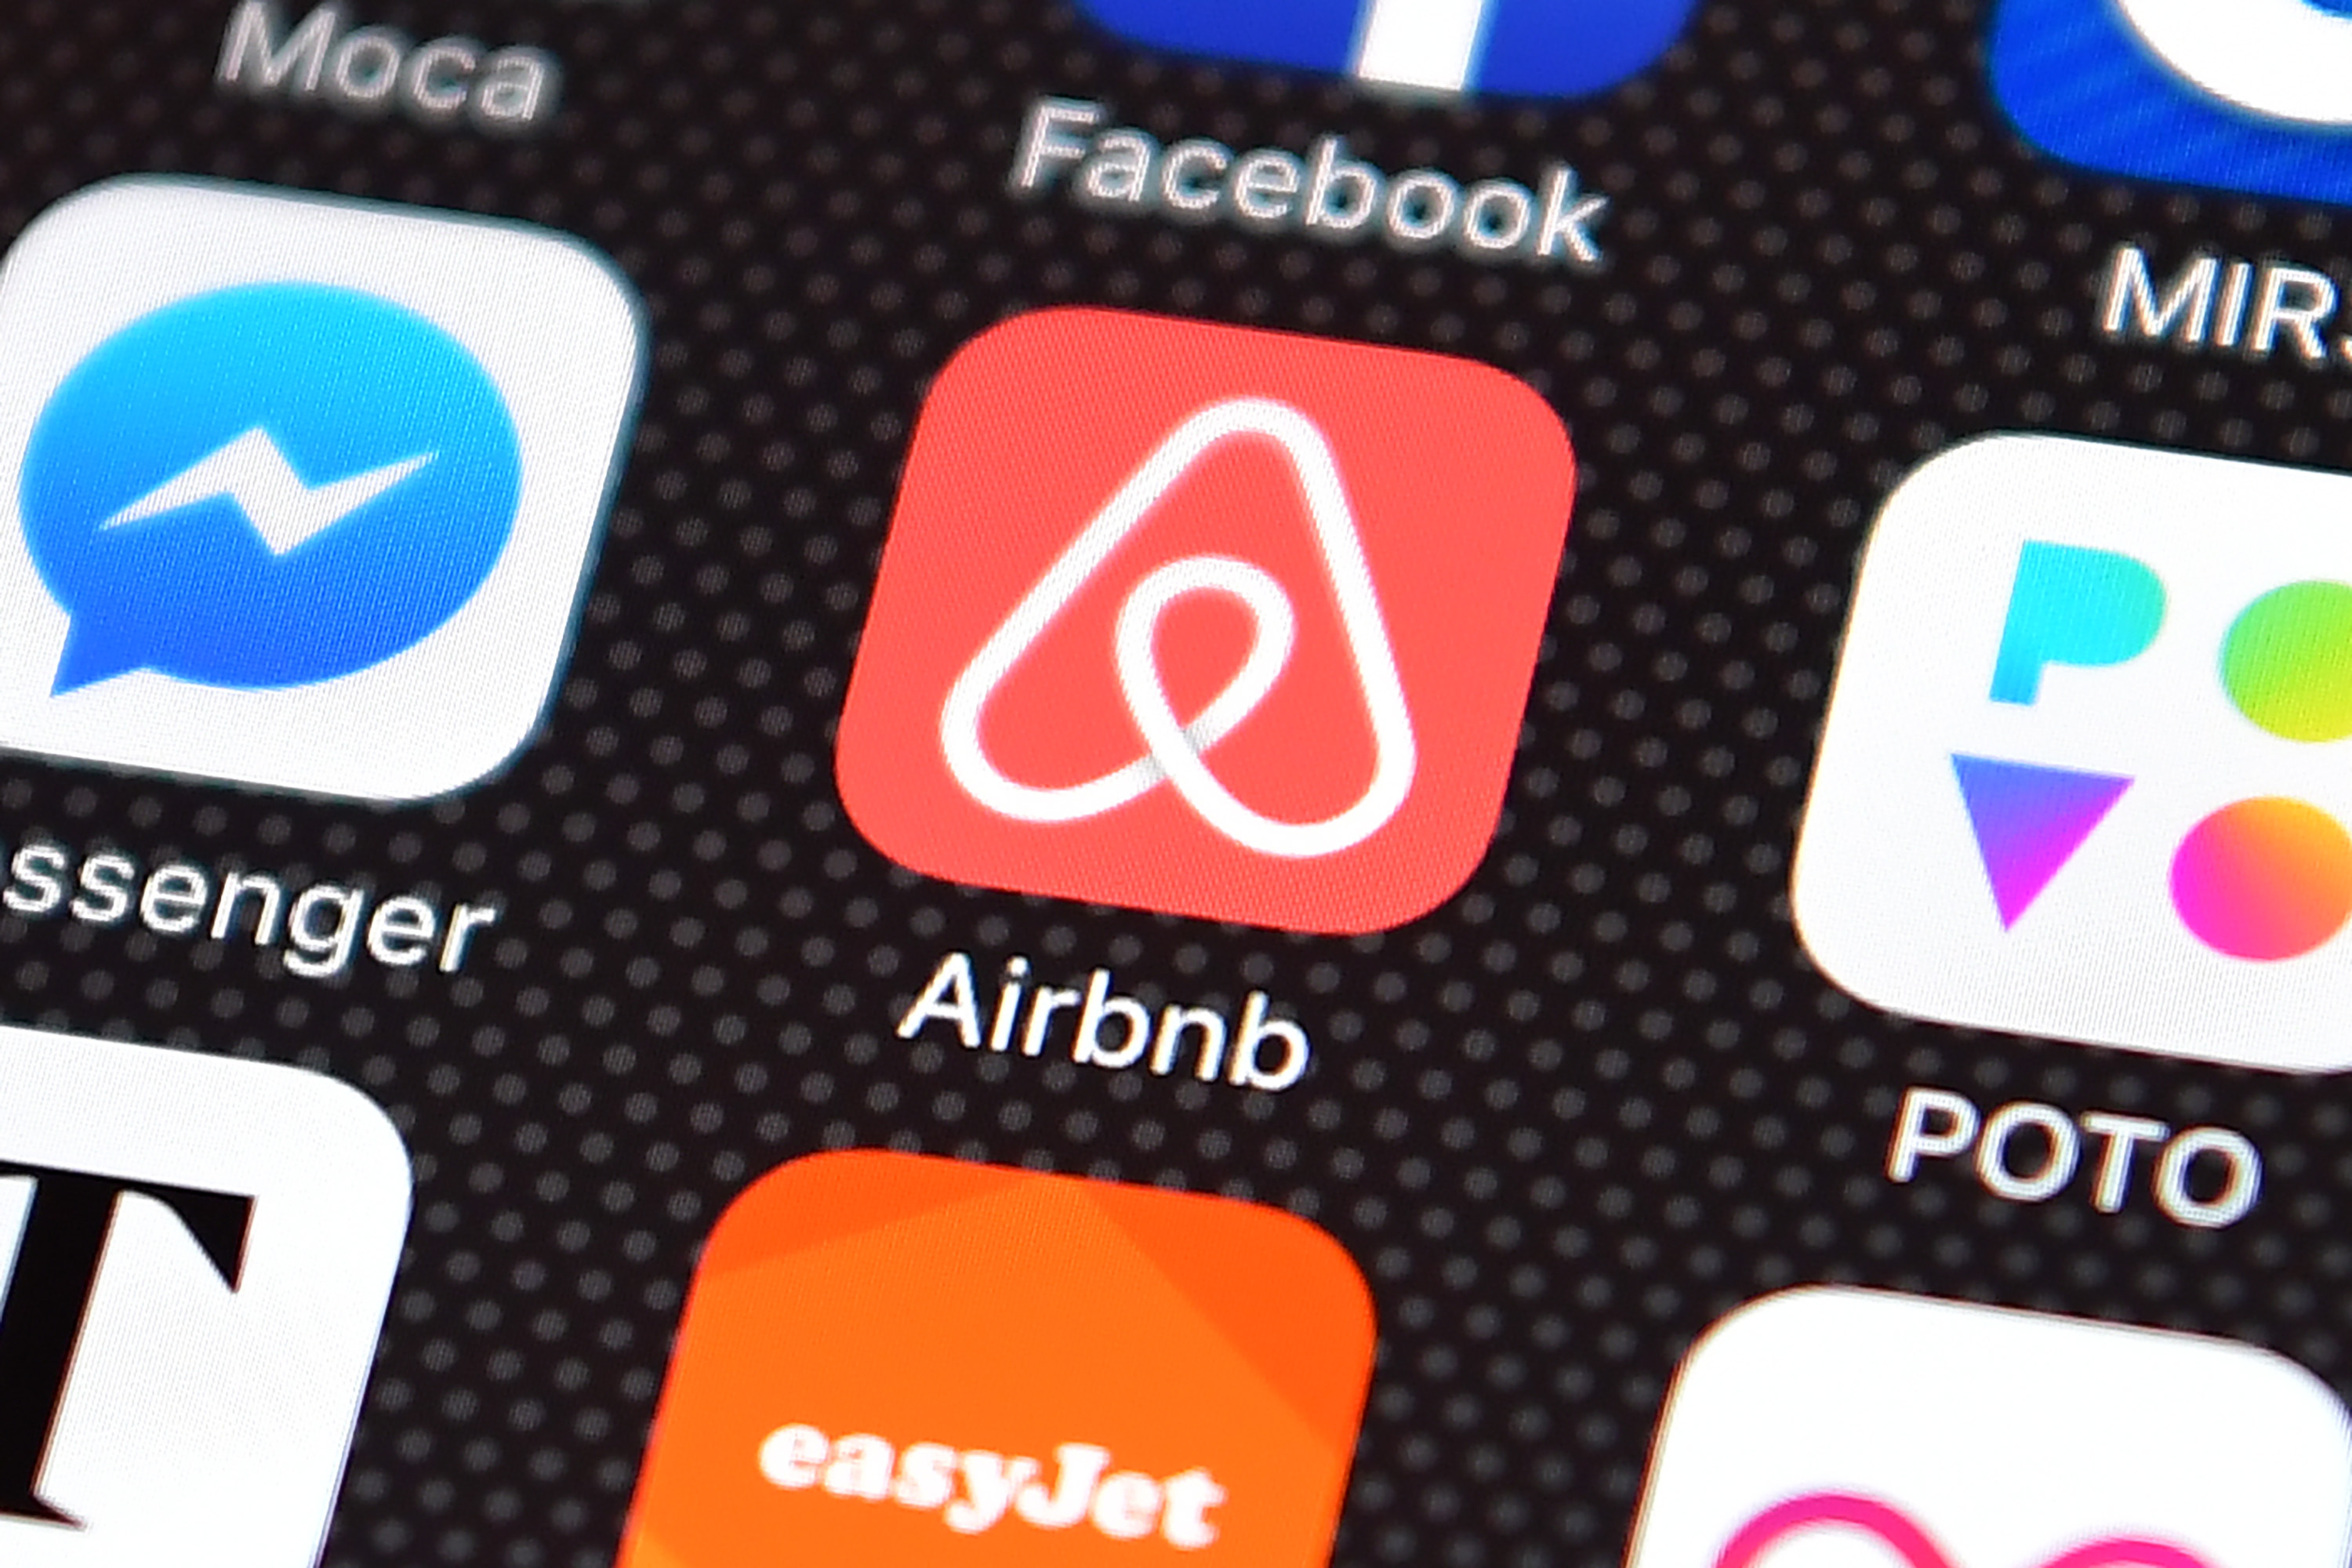 The Airbnb app logo is displayed on an iPhone. (Carl Court&mdash;Getty Images)